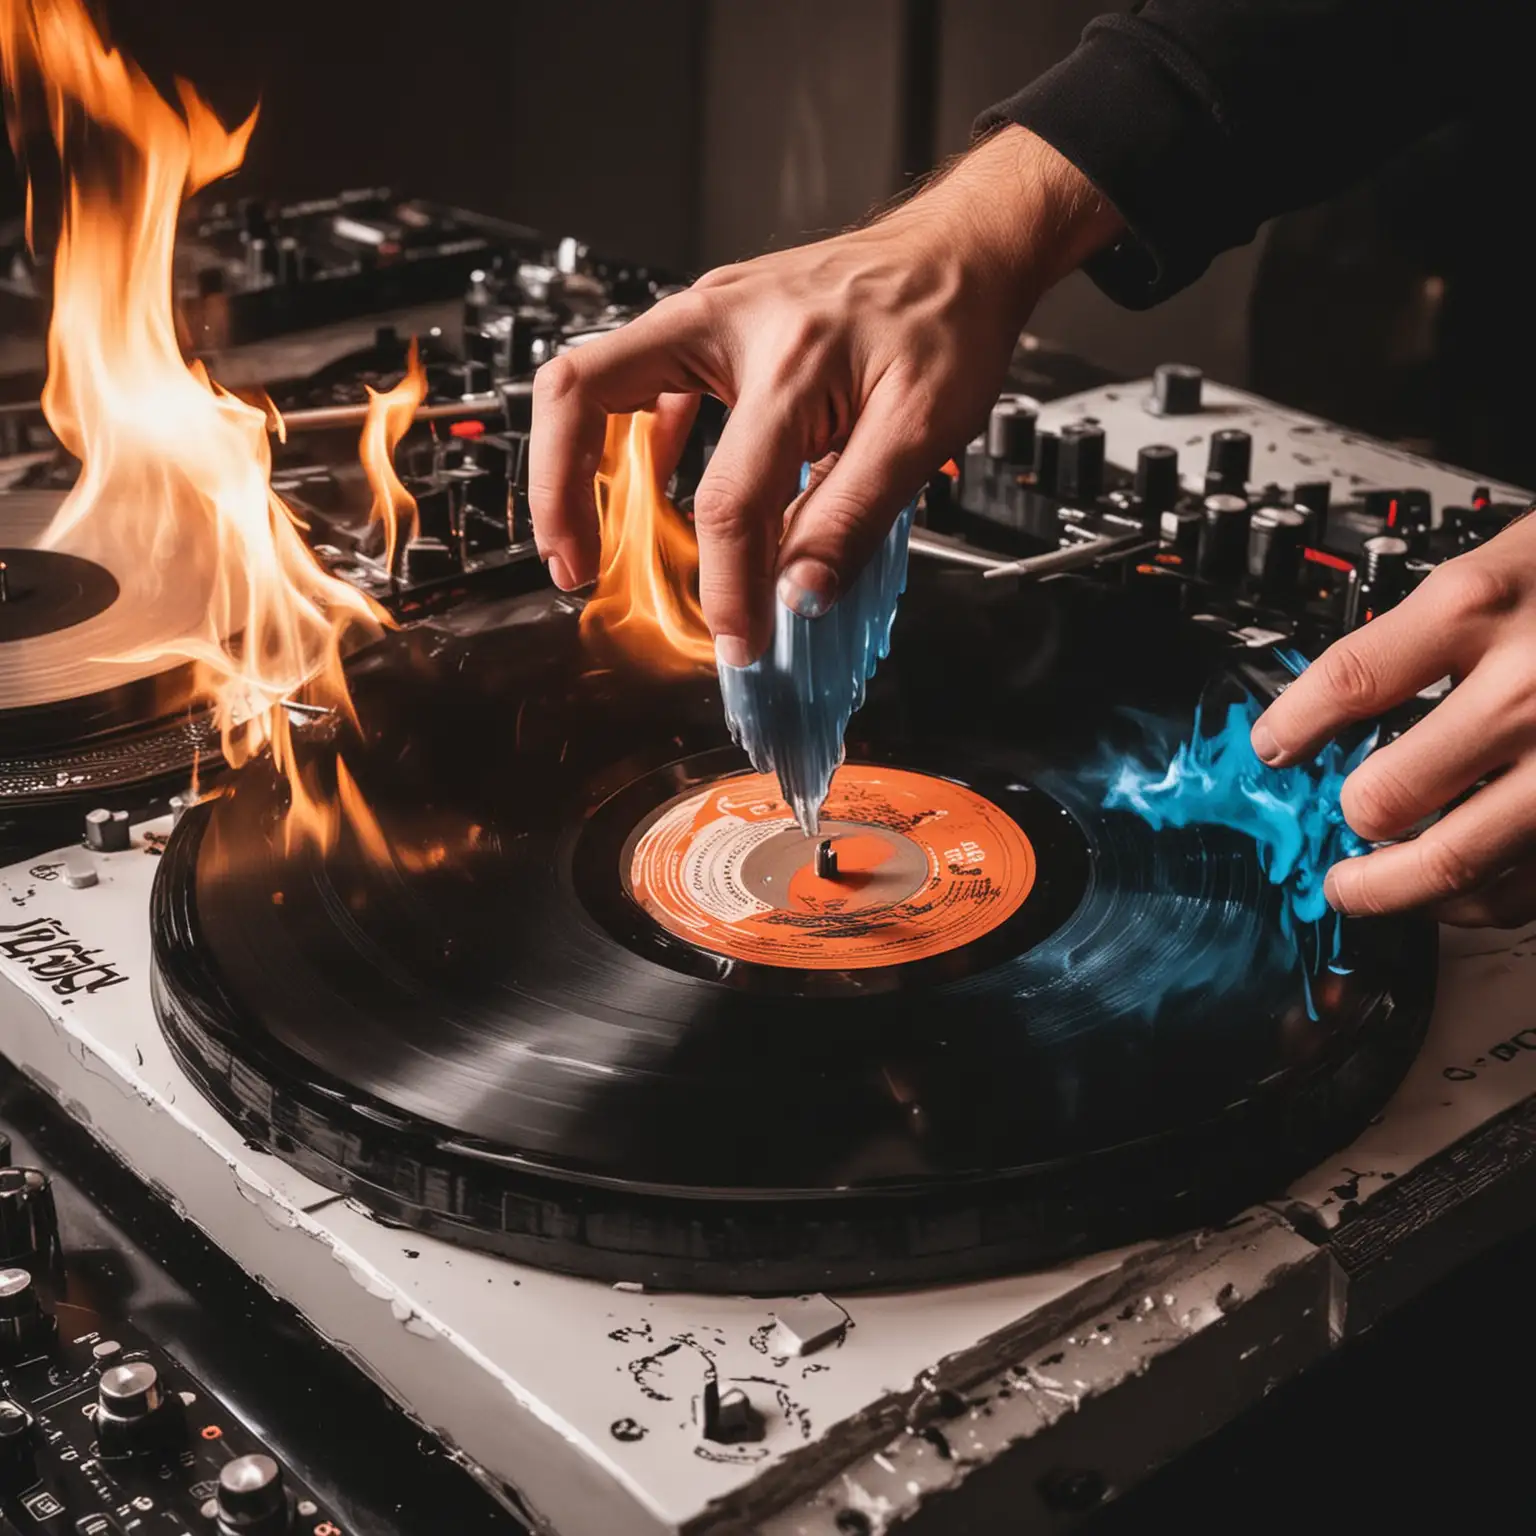 dj scratching a vinyl record with some an fire and ice